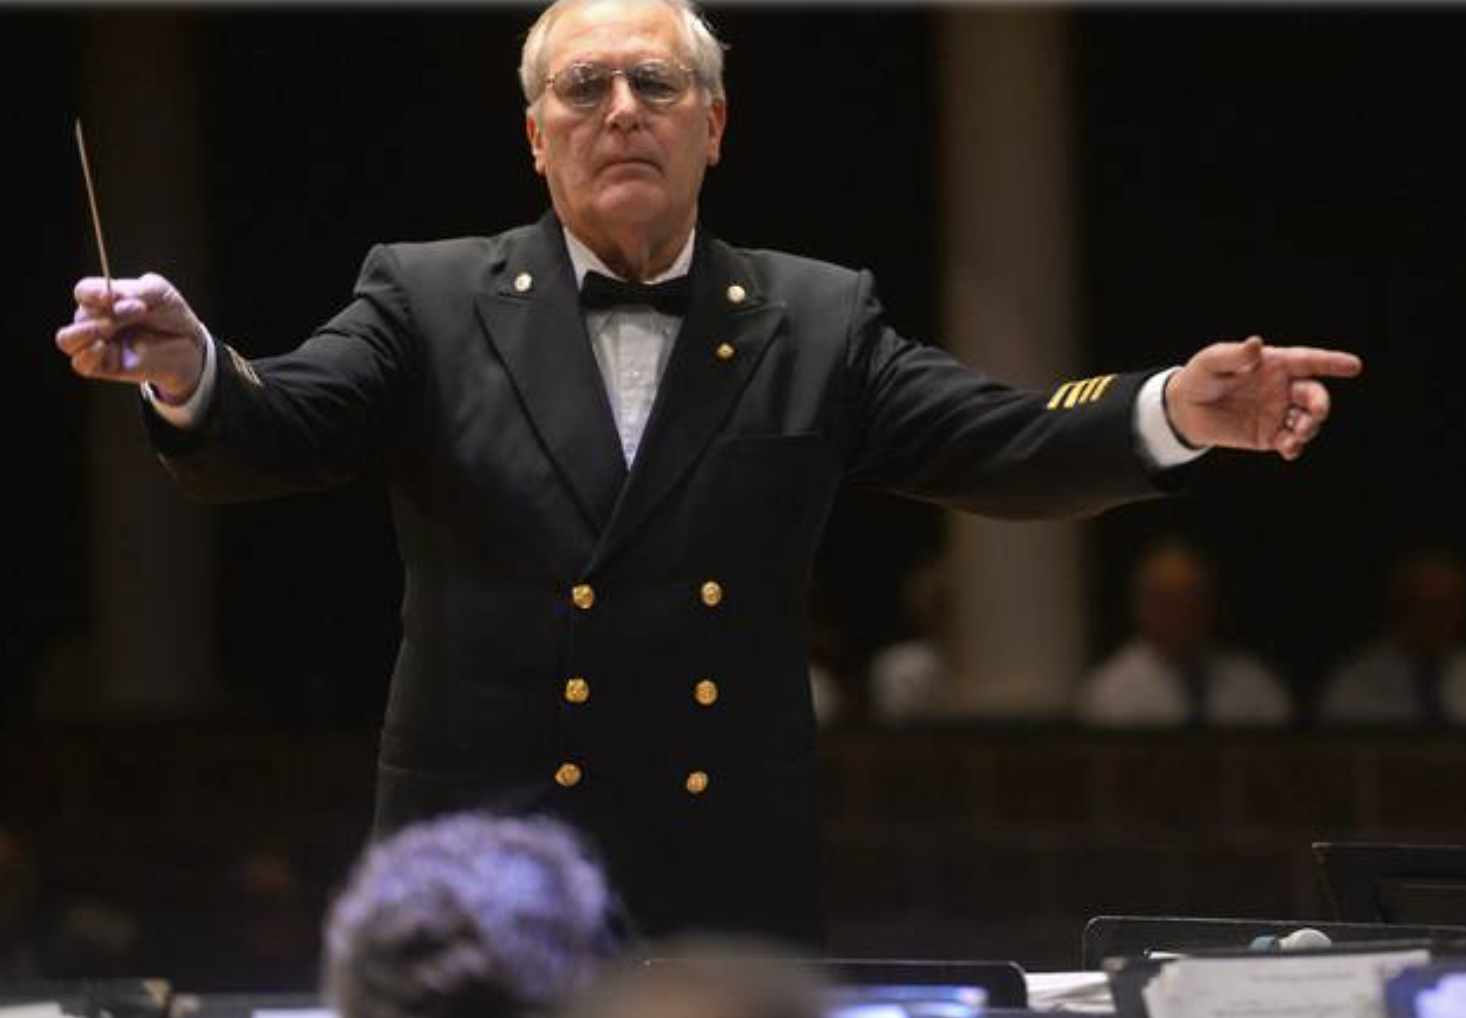 Ronald Demkee to retire as Associate/Pops Conductor and Principal Tuba of the Allentown Symphony Orchestra in July 2024